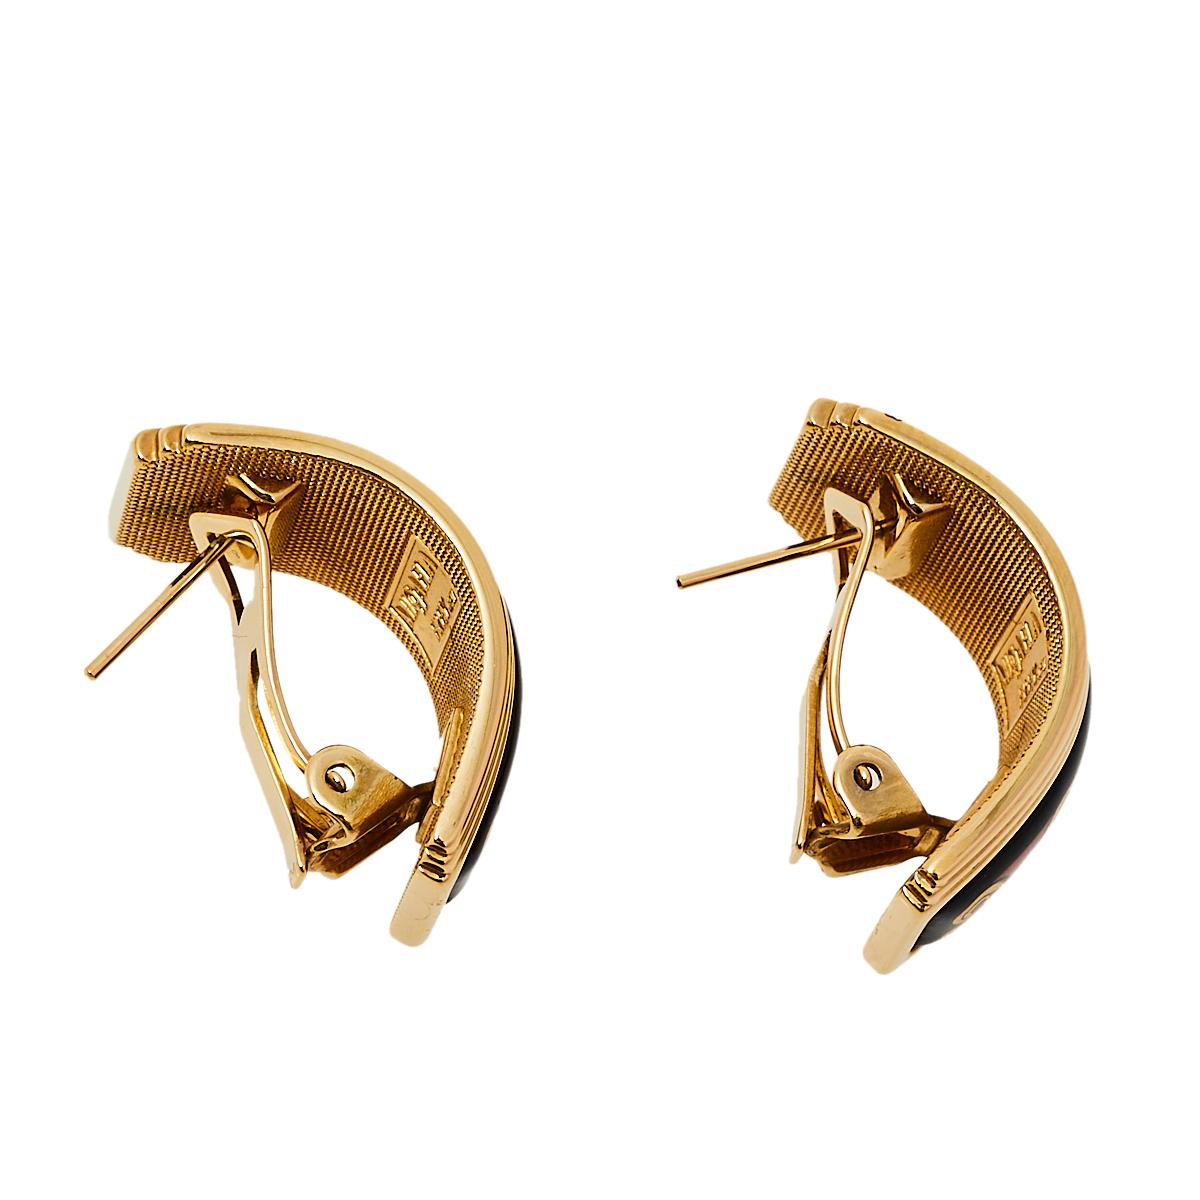 Frey Wille’s earrings are designed with a lot of thought and have a deep-rooted design philosophy. This pair in gold-plated metal is embellished with multicolored fire enamel all over the surface. Style your looks with this meaningful and minimalist